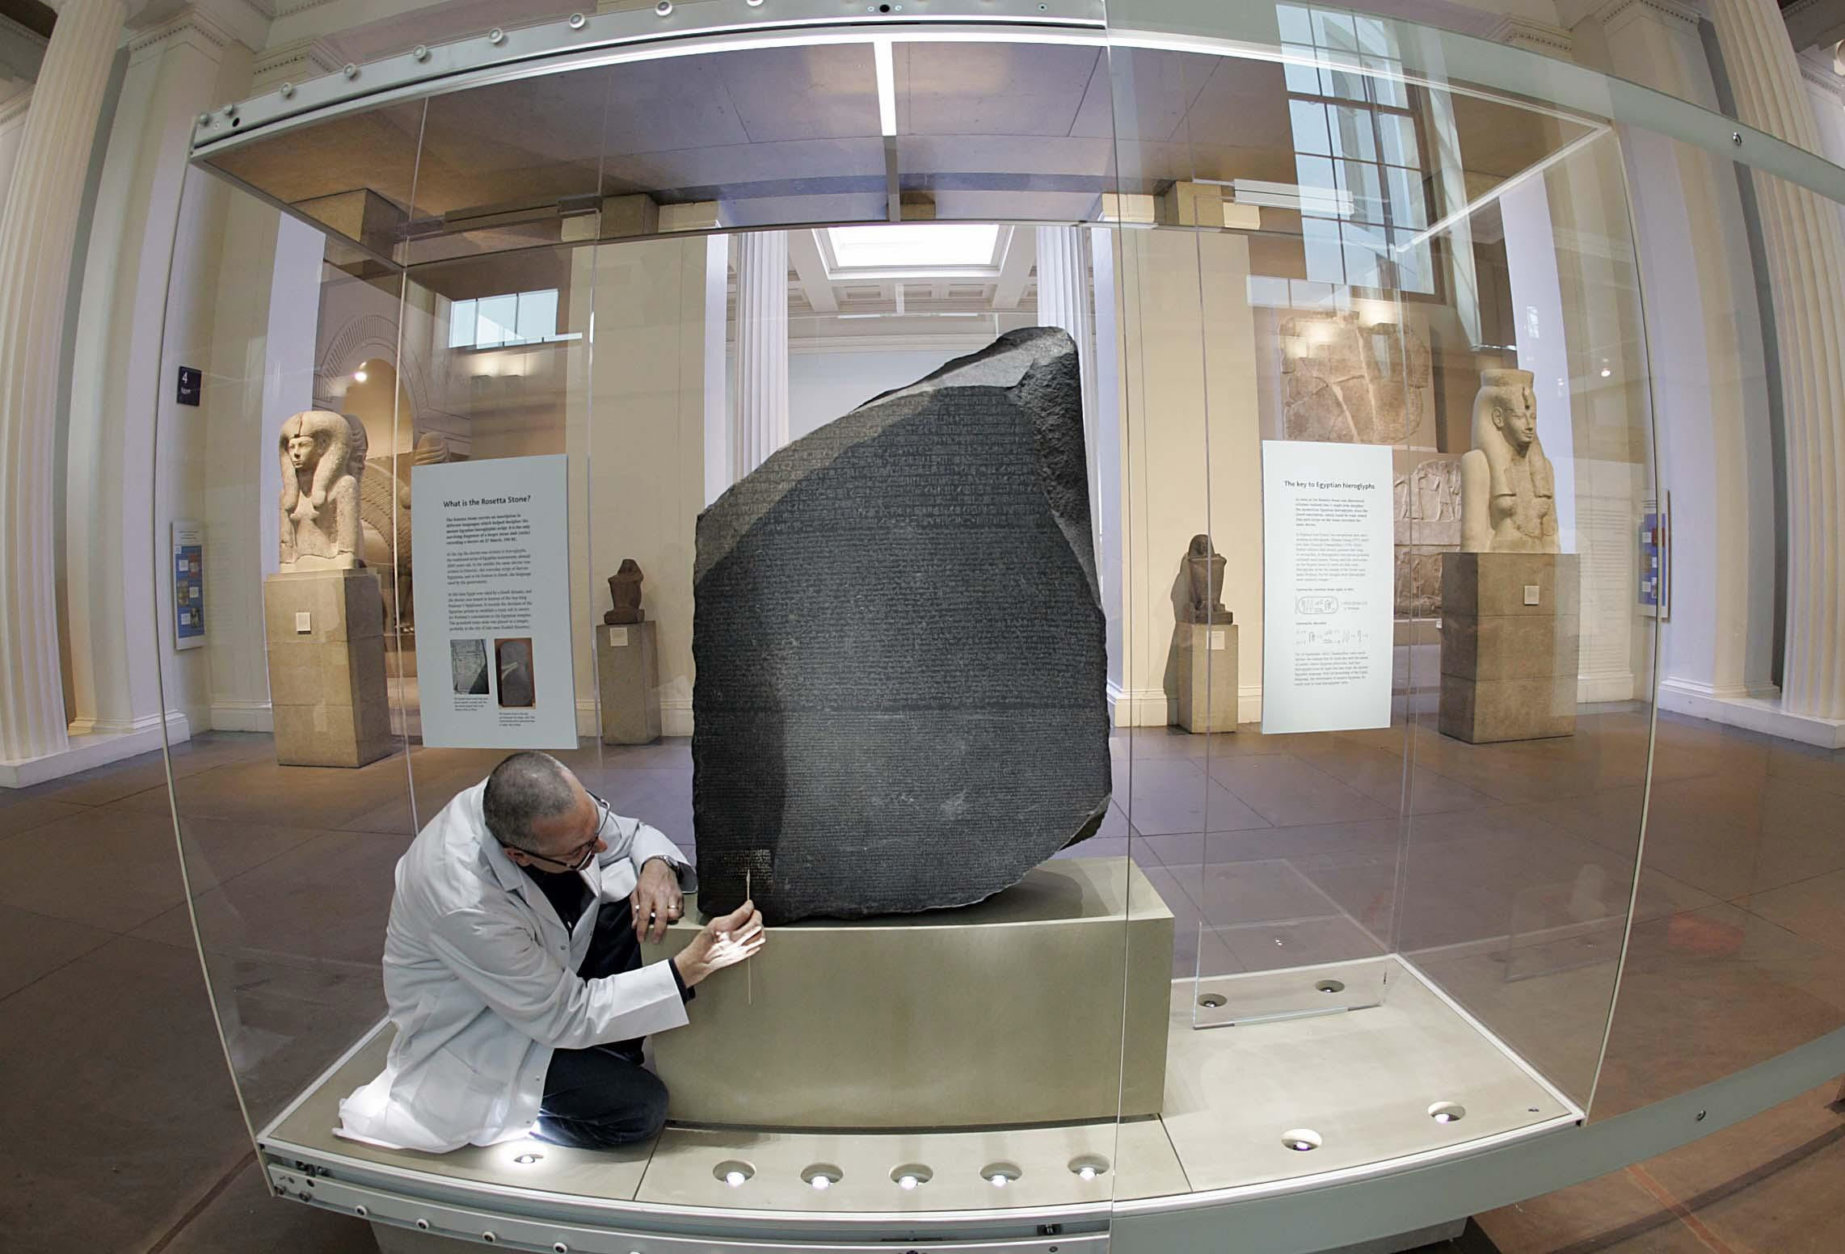 The Rosetta Stone undergoes the last stages of its conservation by Senior Stone Conservator Nic Lee, in the Egyptian Sculpture Gallery at The British Museum, in London, Tuesday July 6, 2004.  According to the museum, the new display will reflect the enduring relevance of the Rosetta Stone as a symbol of human understanding.  The Rosetta Stone is a granite slab dating from 196 BC bearing an inscription that was the key to the deciphering of Egyptian Hieroglyphics, it was found by French troops in 1799 near the town of Rashid (Rosetta) in Lower Egypt. ( Photo / Edmond Terakopian, PA) ** UNITED KINGDOM OUT  NO SALES  MAGS OUT **